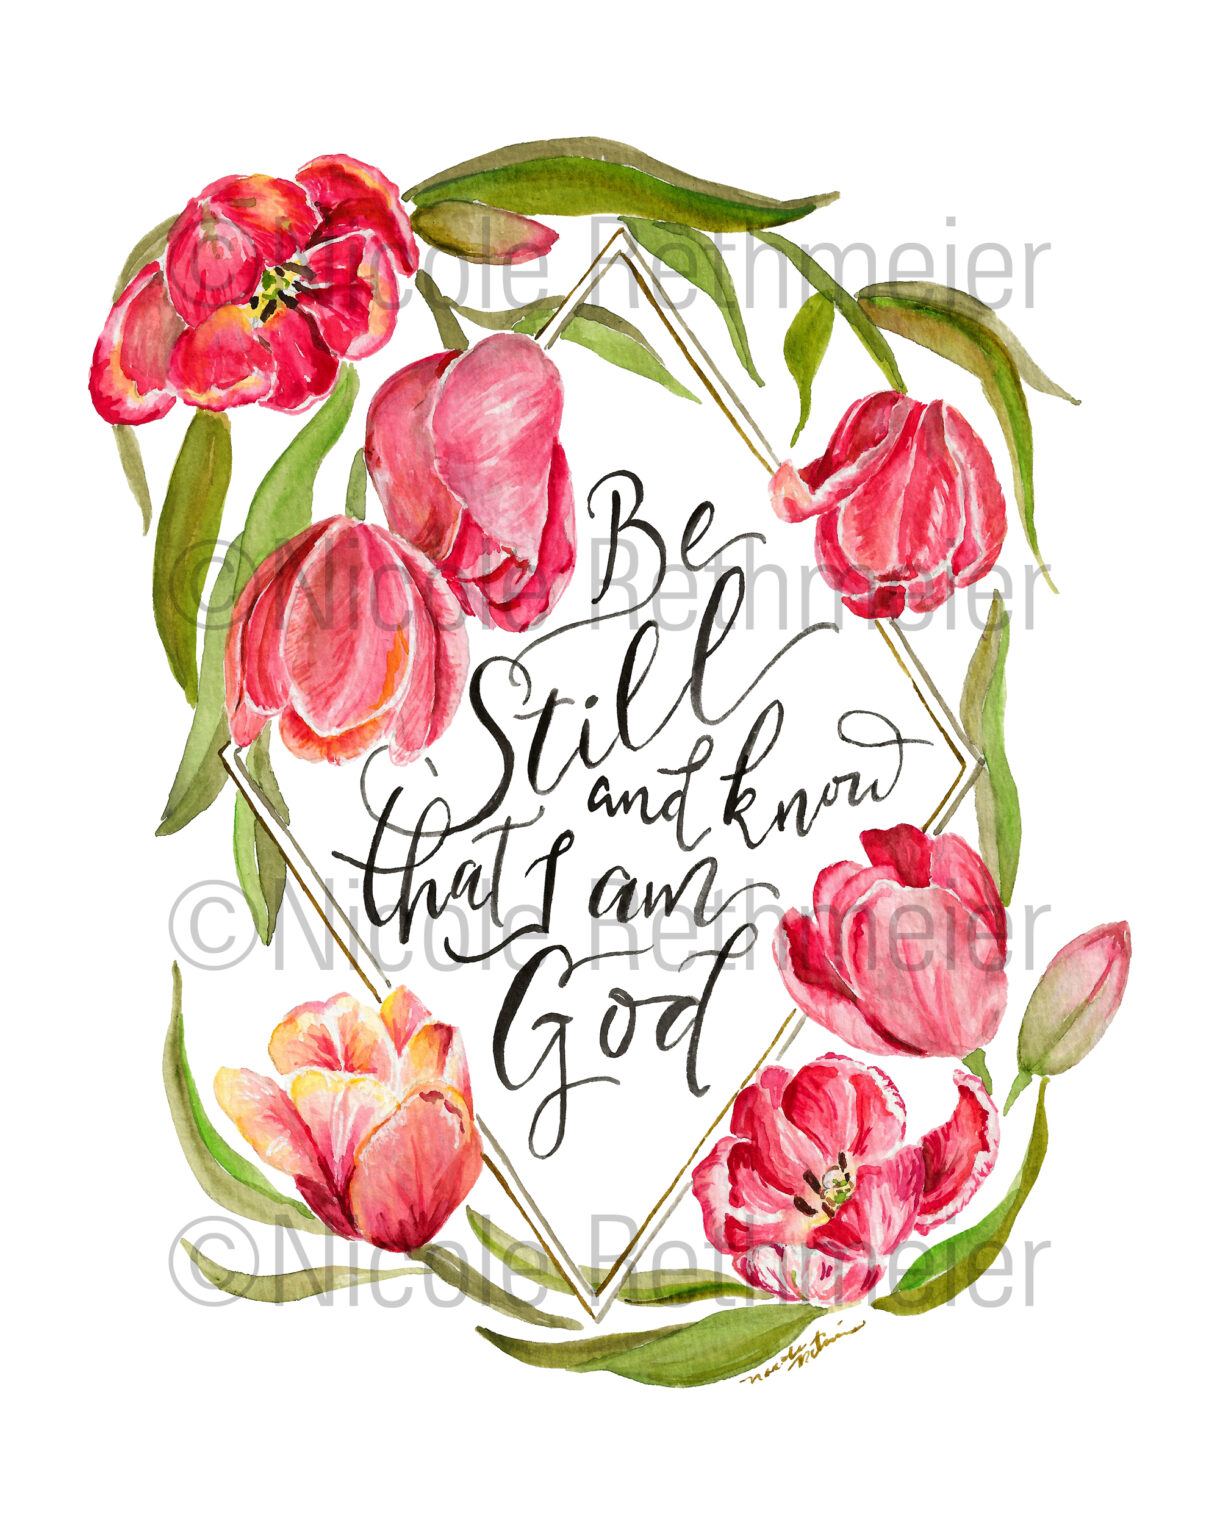 Be Still and Know Tulips Scripture Verse inspirational watercolor print - Psalm 46:10